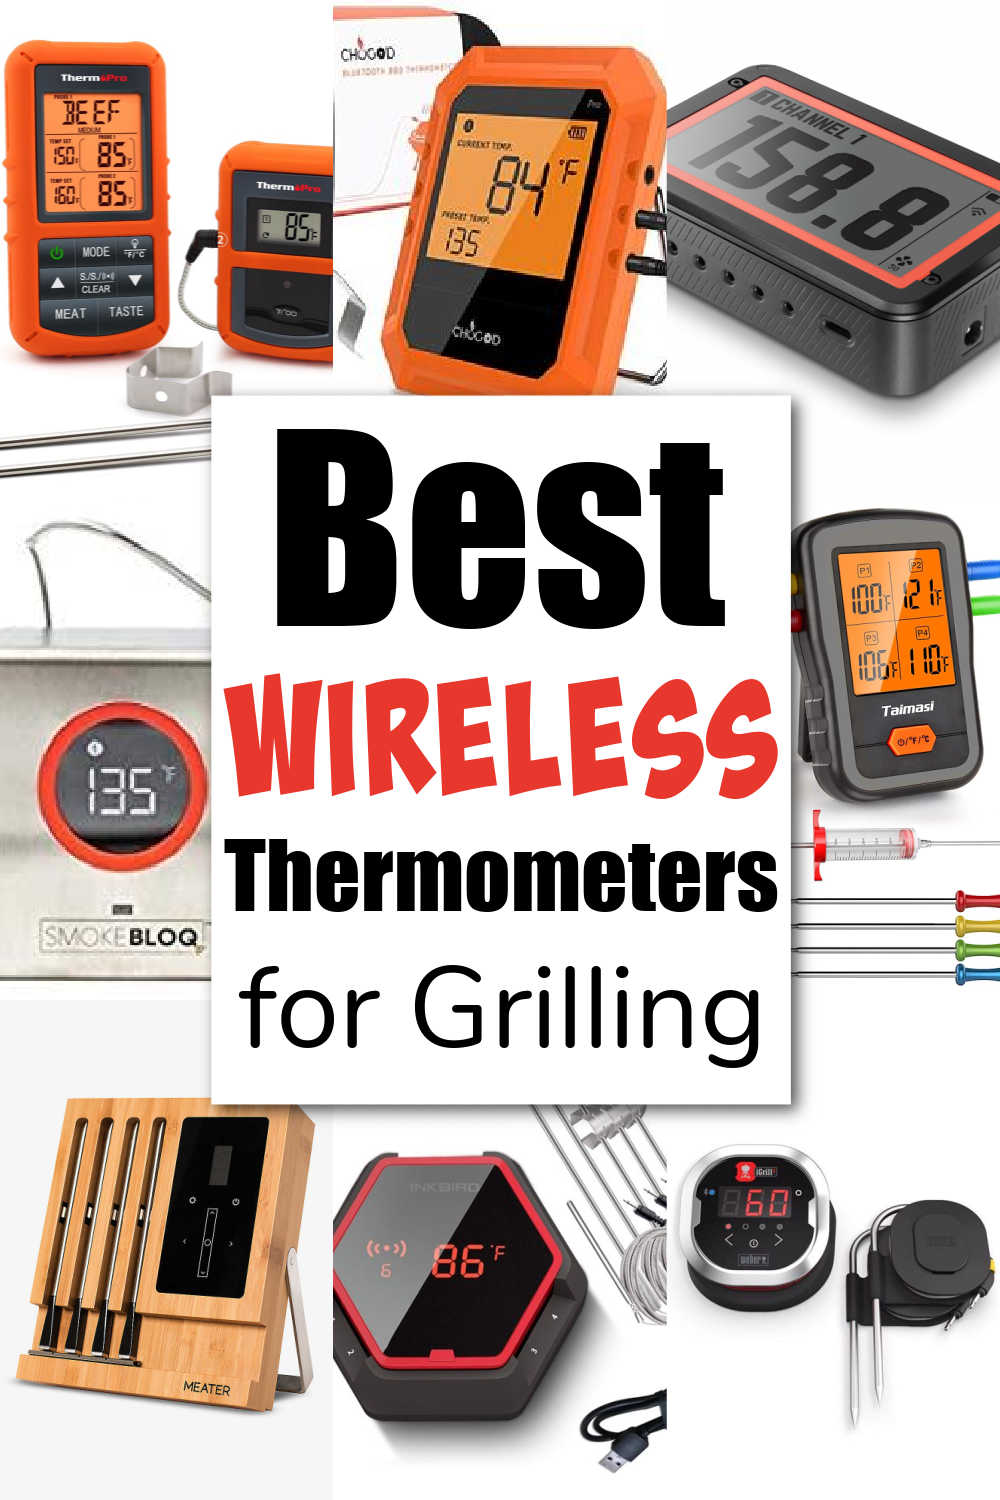 background filled with images of different wireless meat thermometers used in grilling and text overlay.